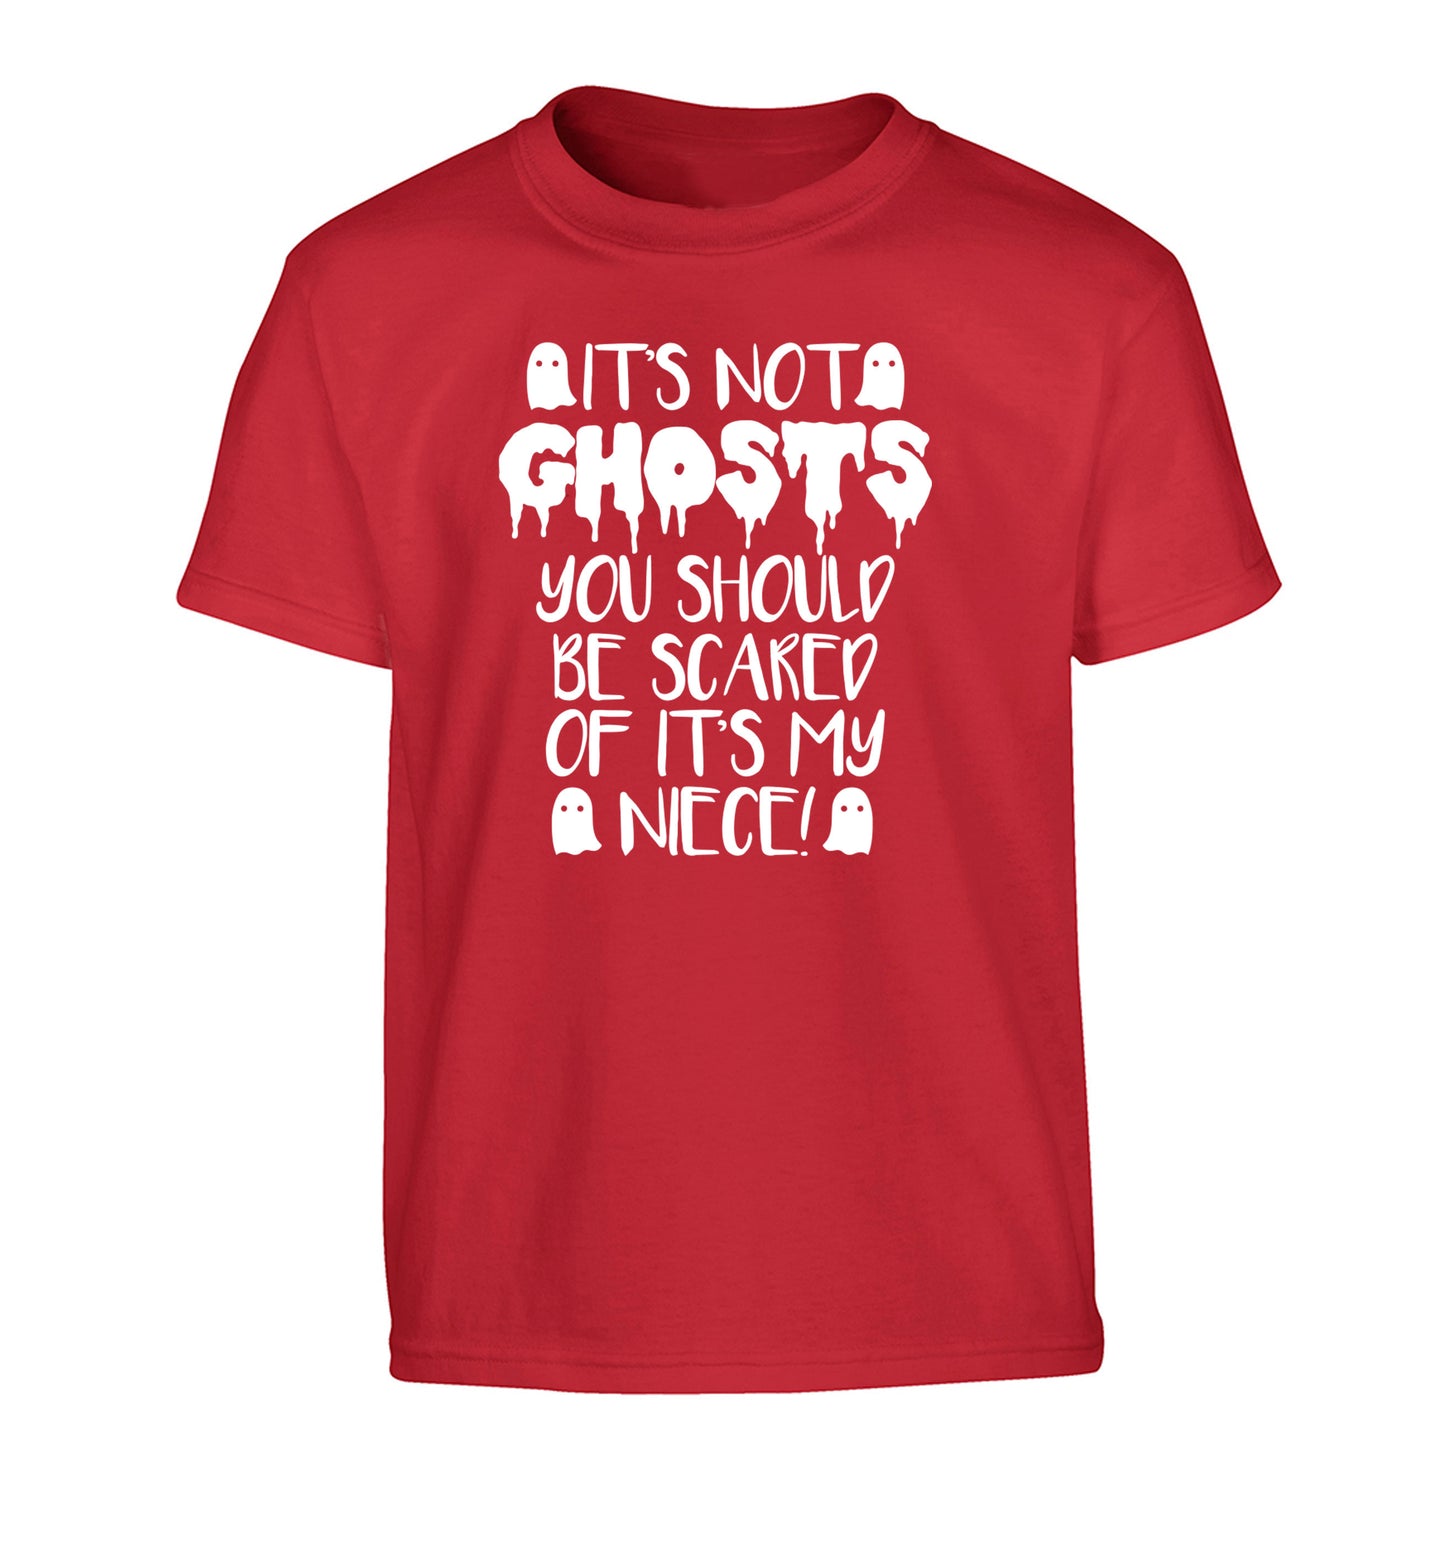 It's not ghosts you should be scared of it's my niece! Children's red Tshirt 12-14 Years